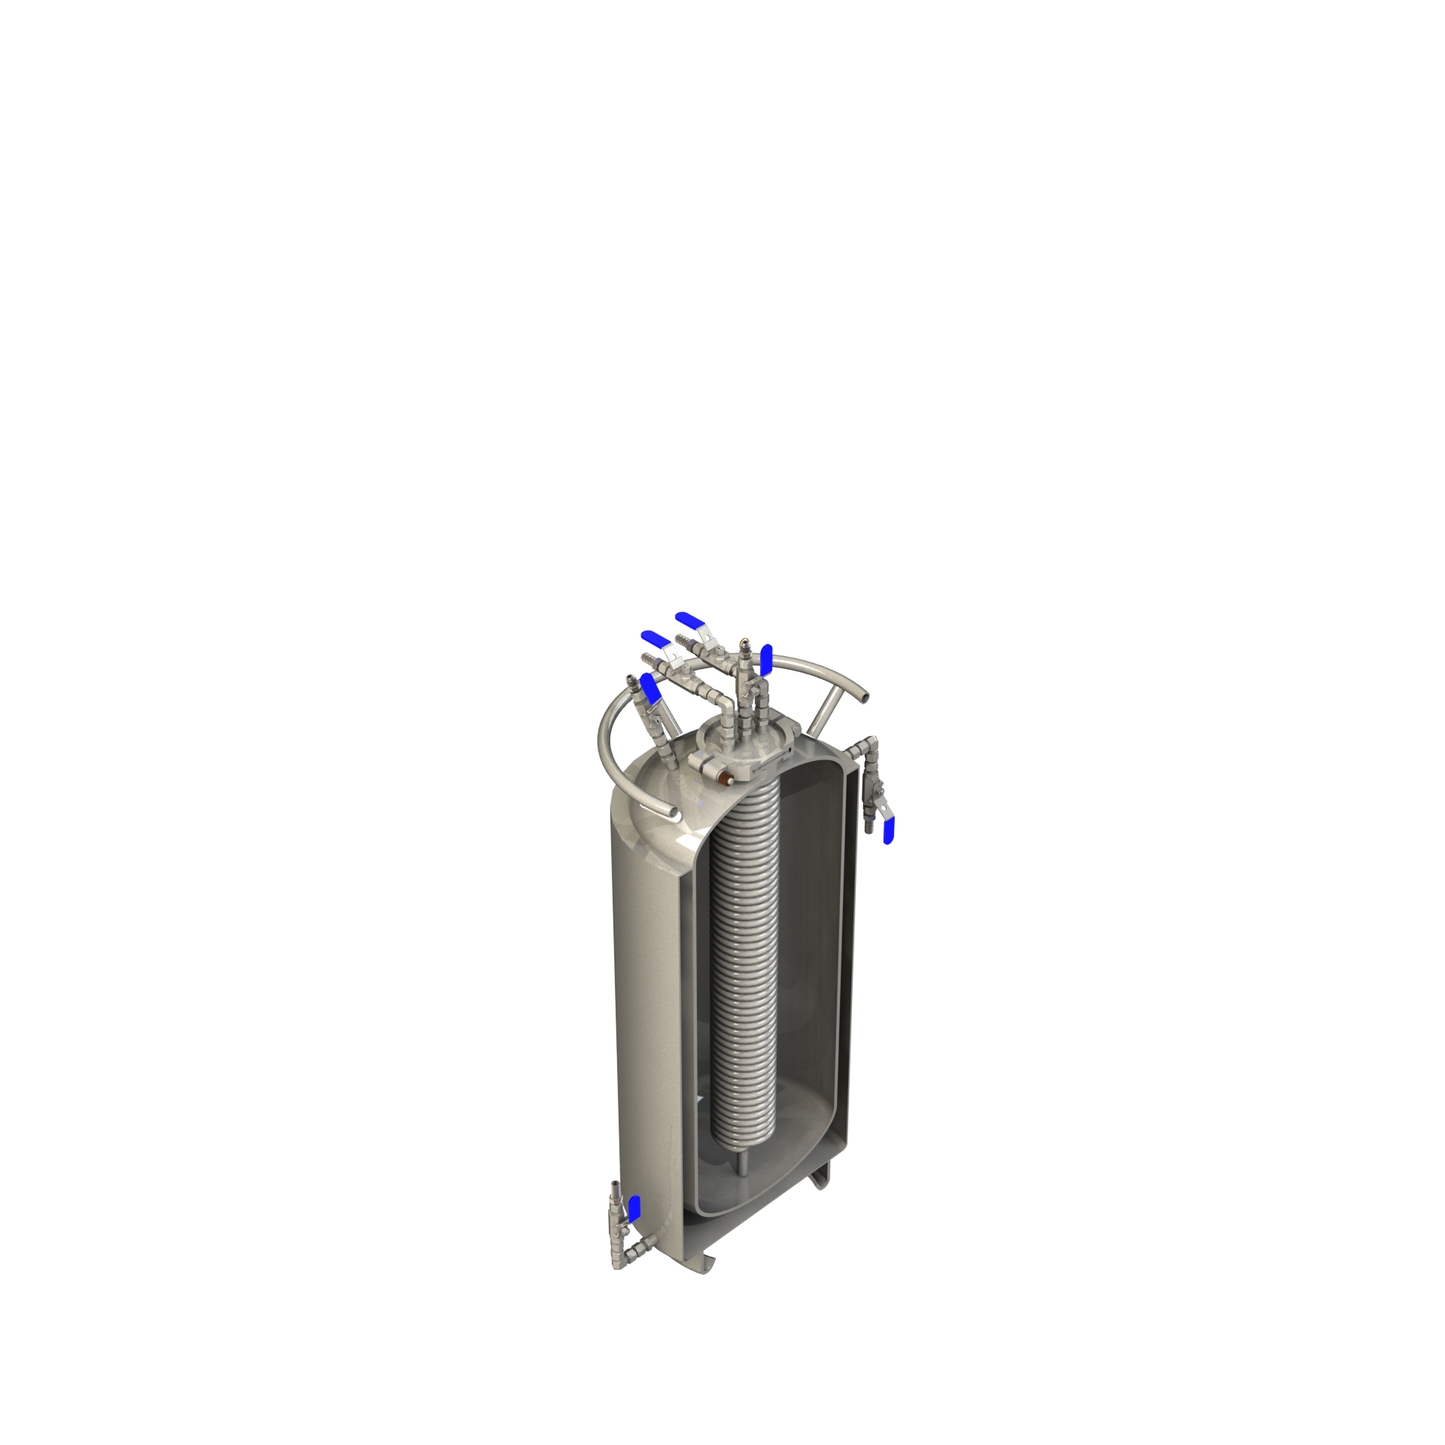 Jacketed Solvent Tank - 50lb